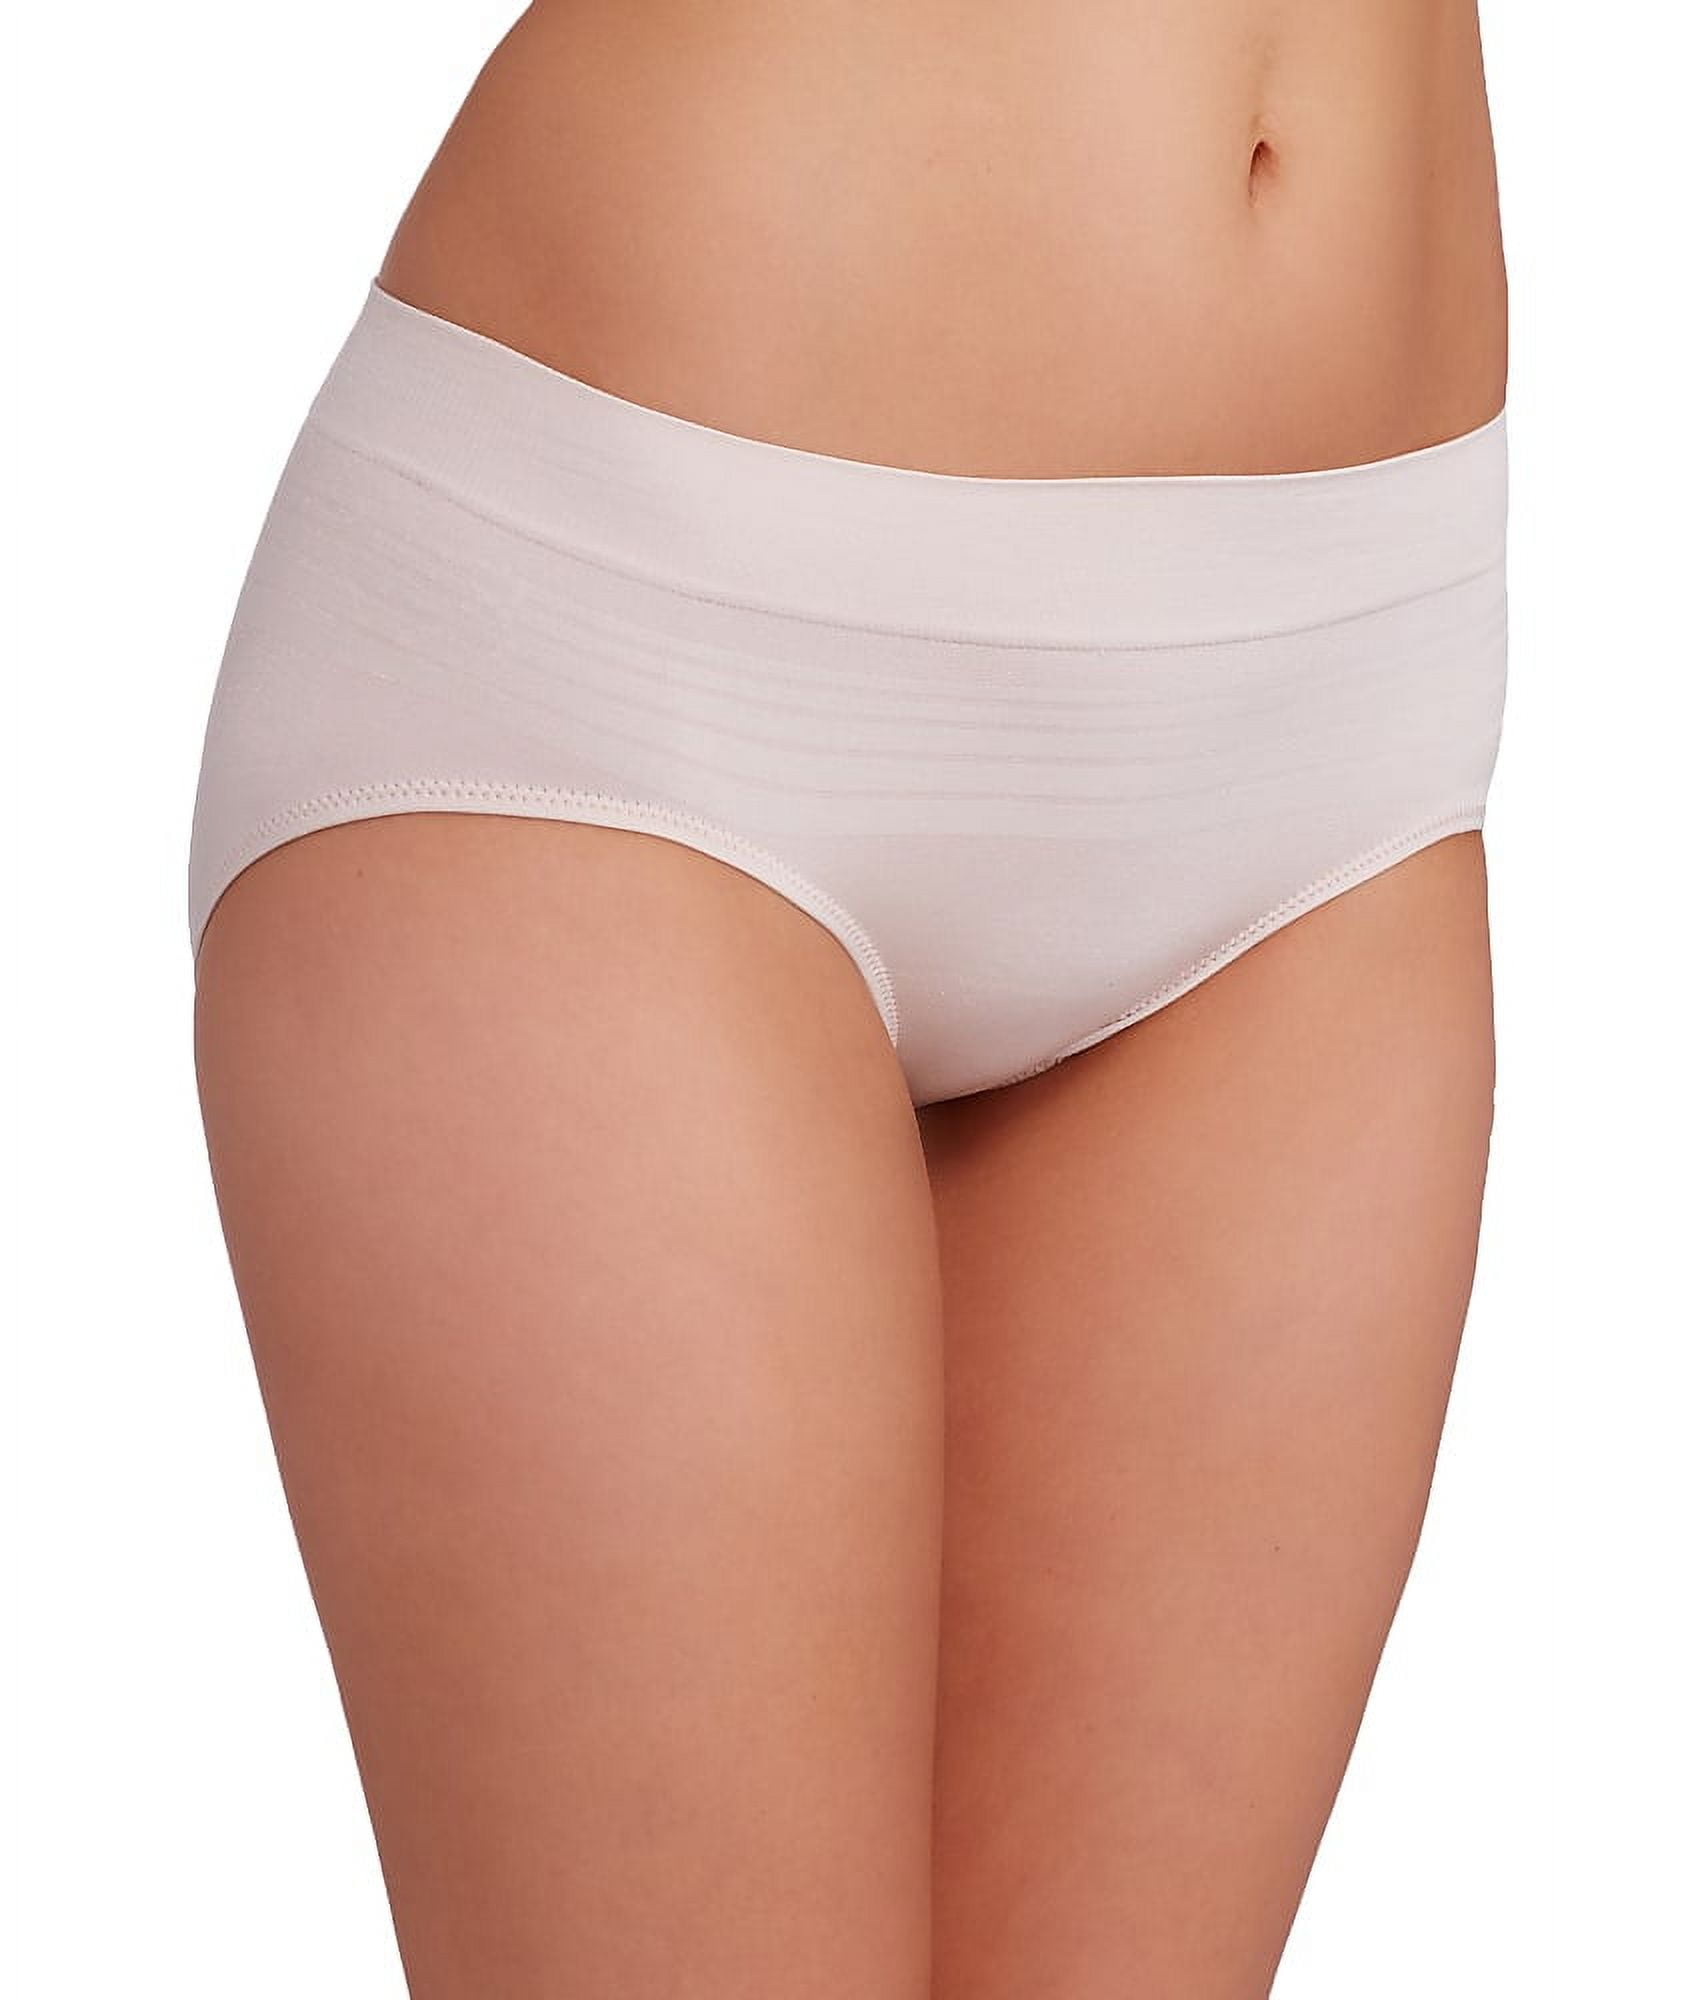 Warner's No Pinching No Problems Seamless Panties X-Large Toasted almond  beige 